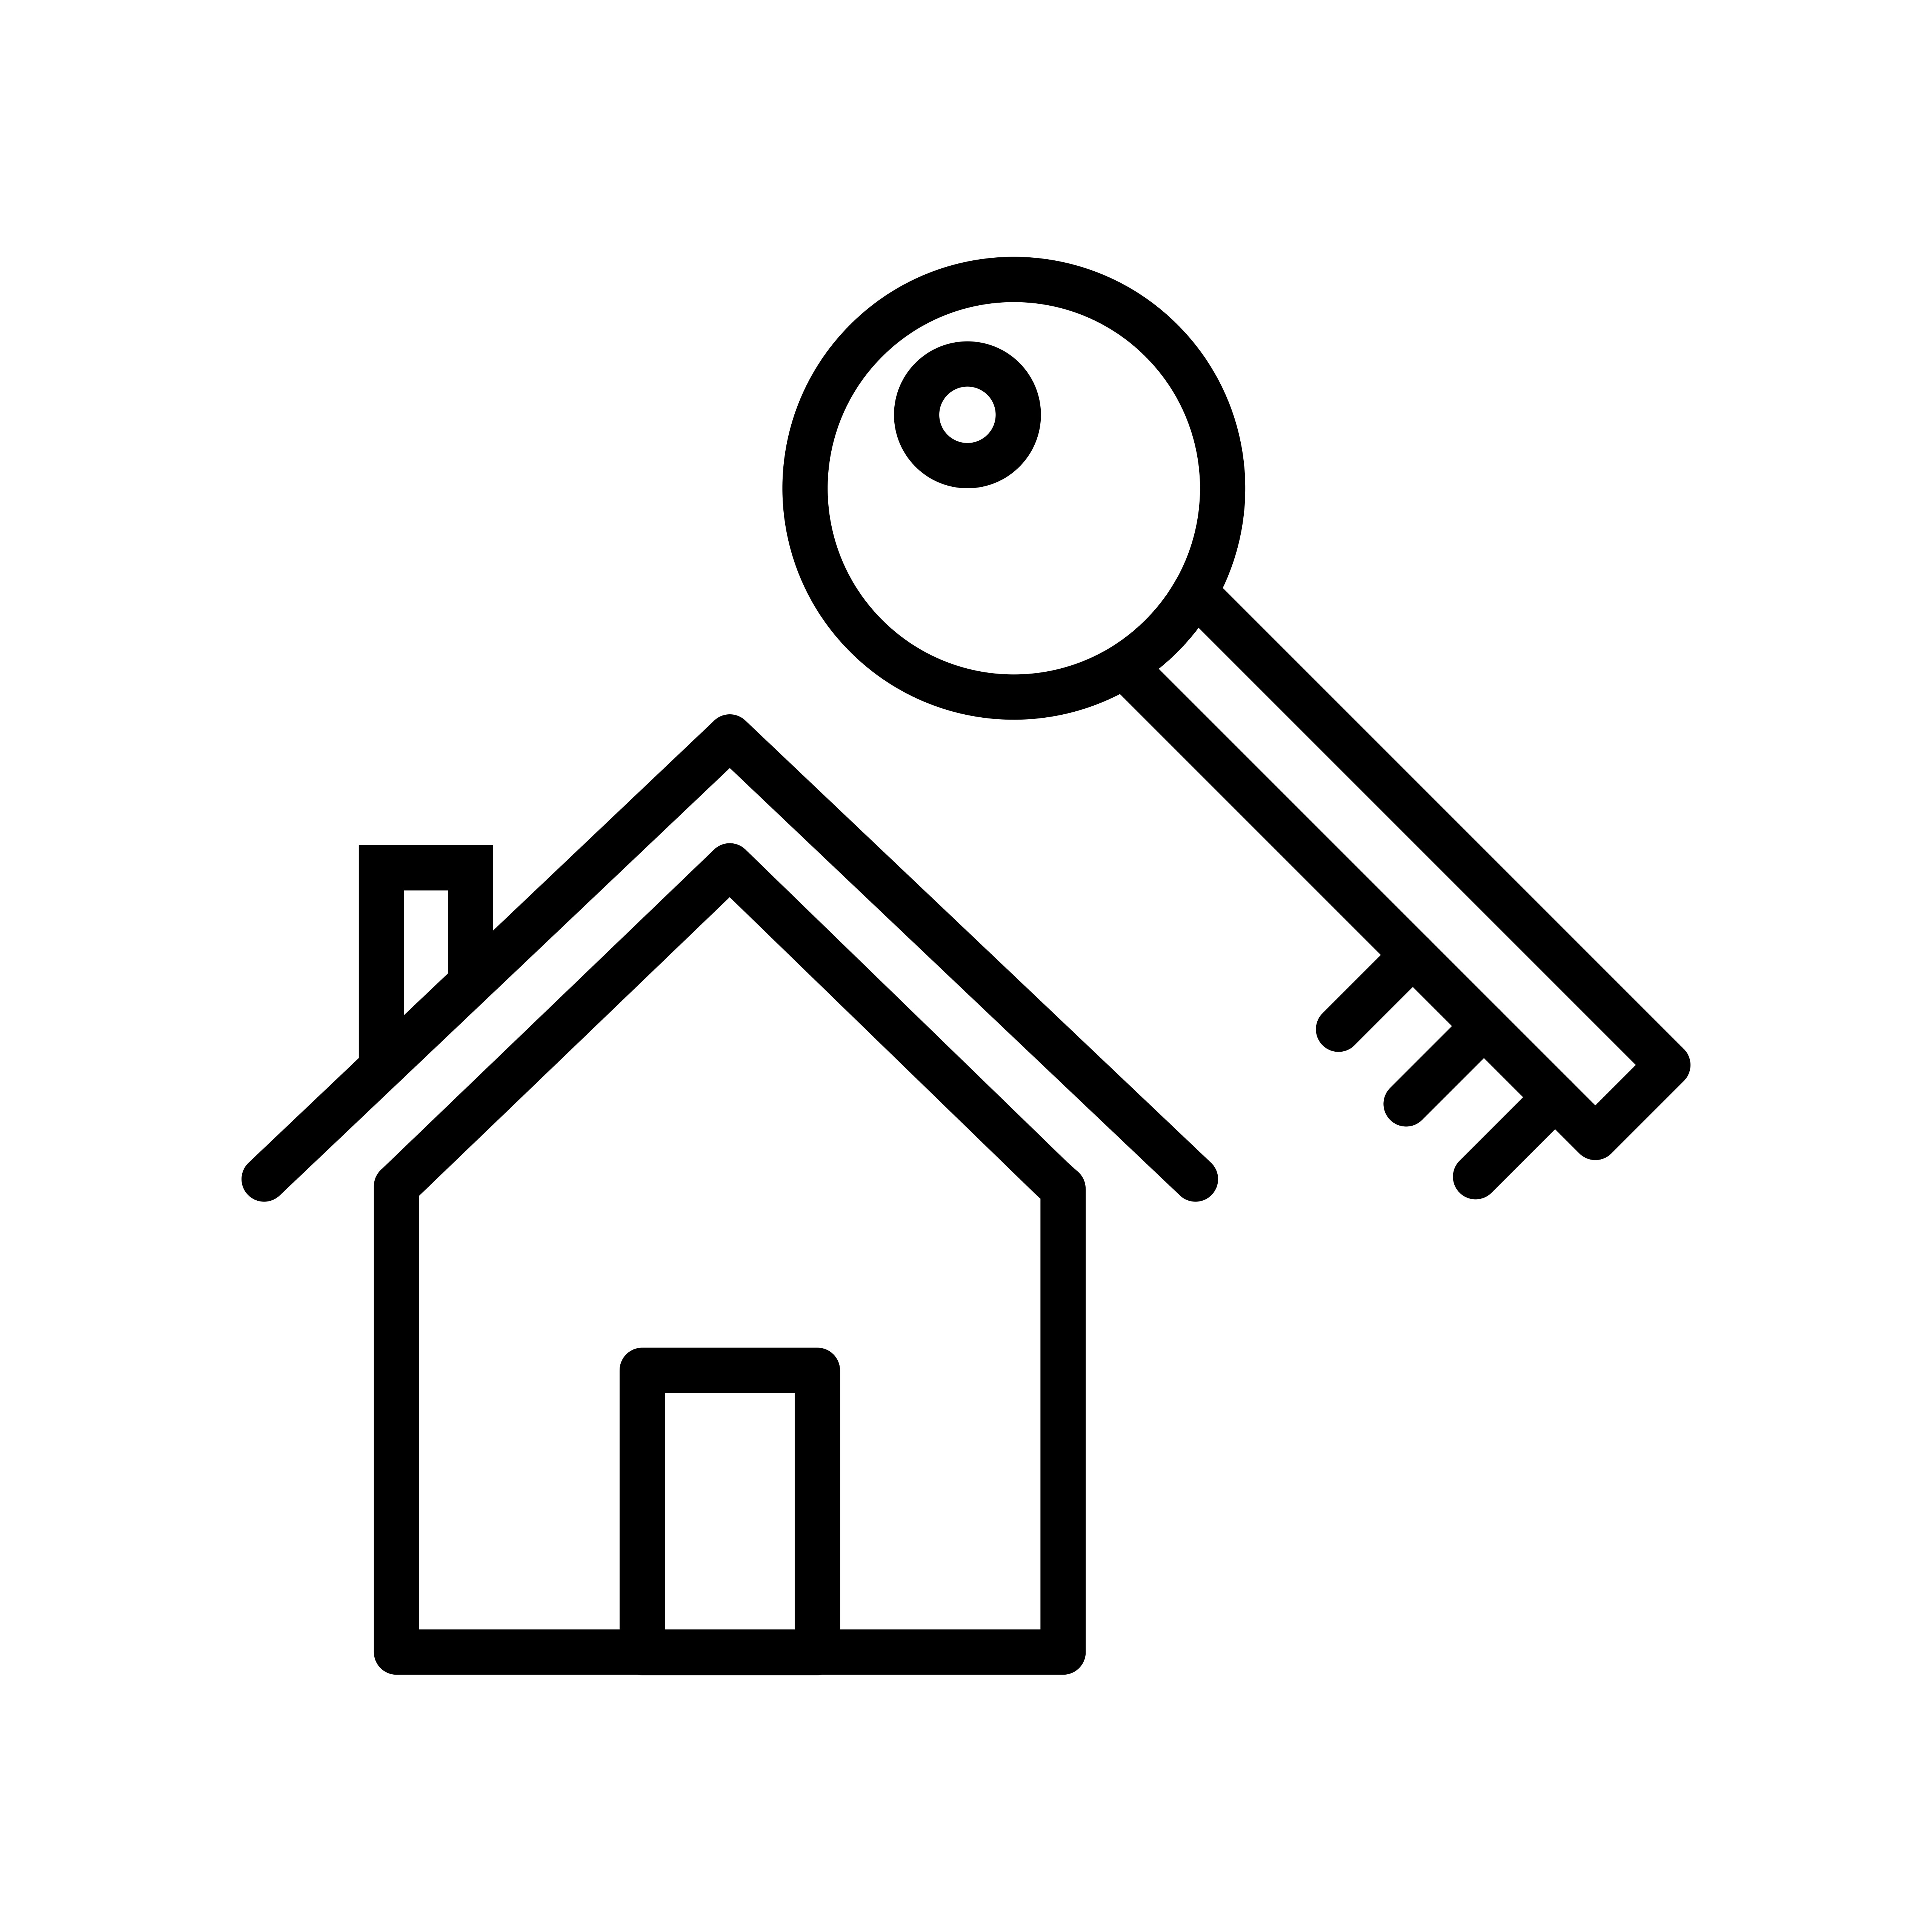 Download House Key Vector Icon - Download Free Vectors, Clipart ...